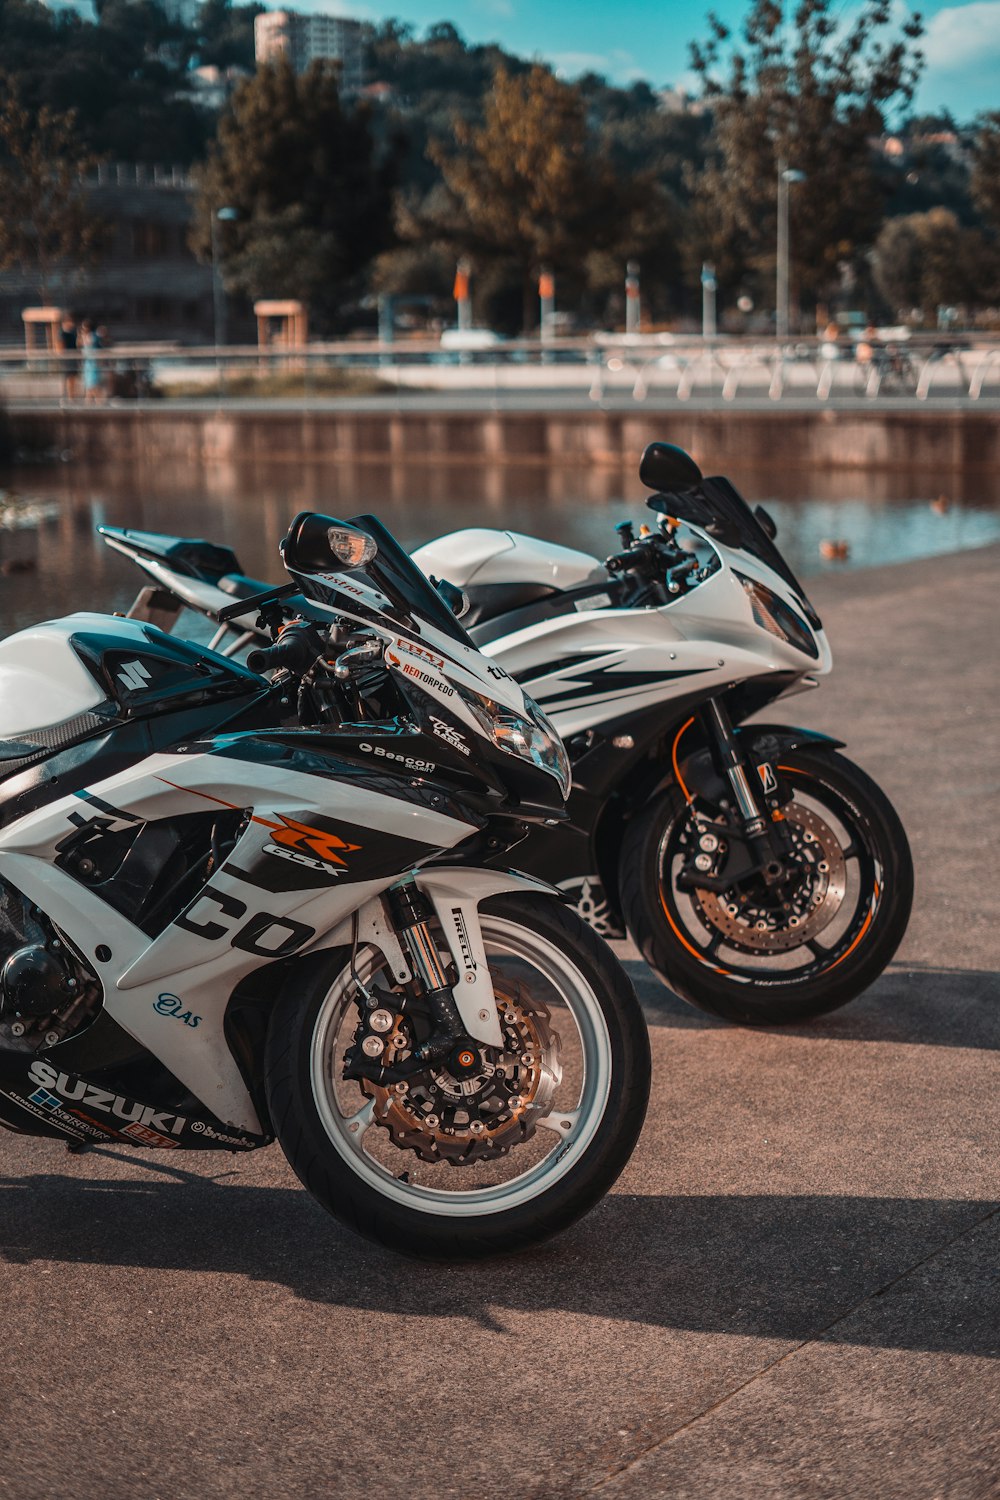 Yamaha R6 Pictures  Download Free Images on Unsplash